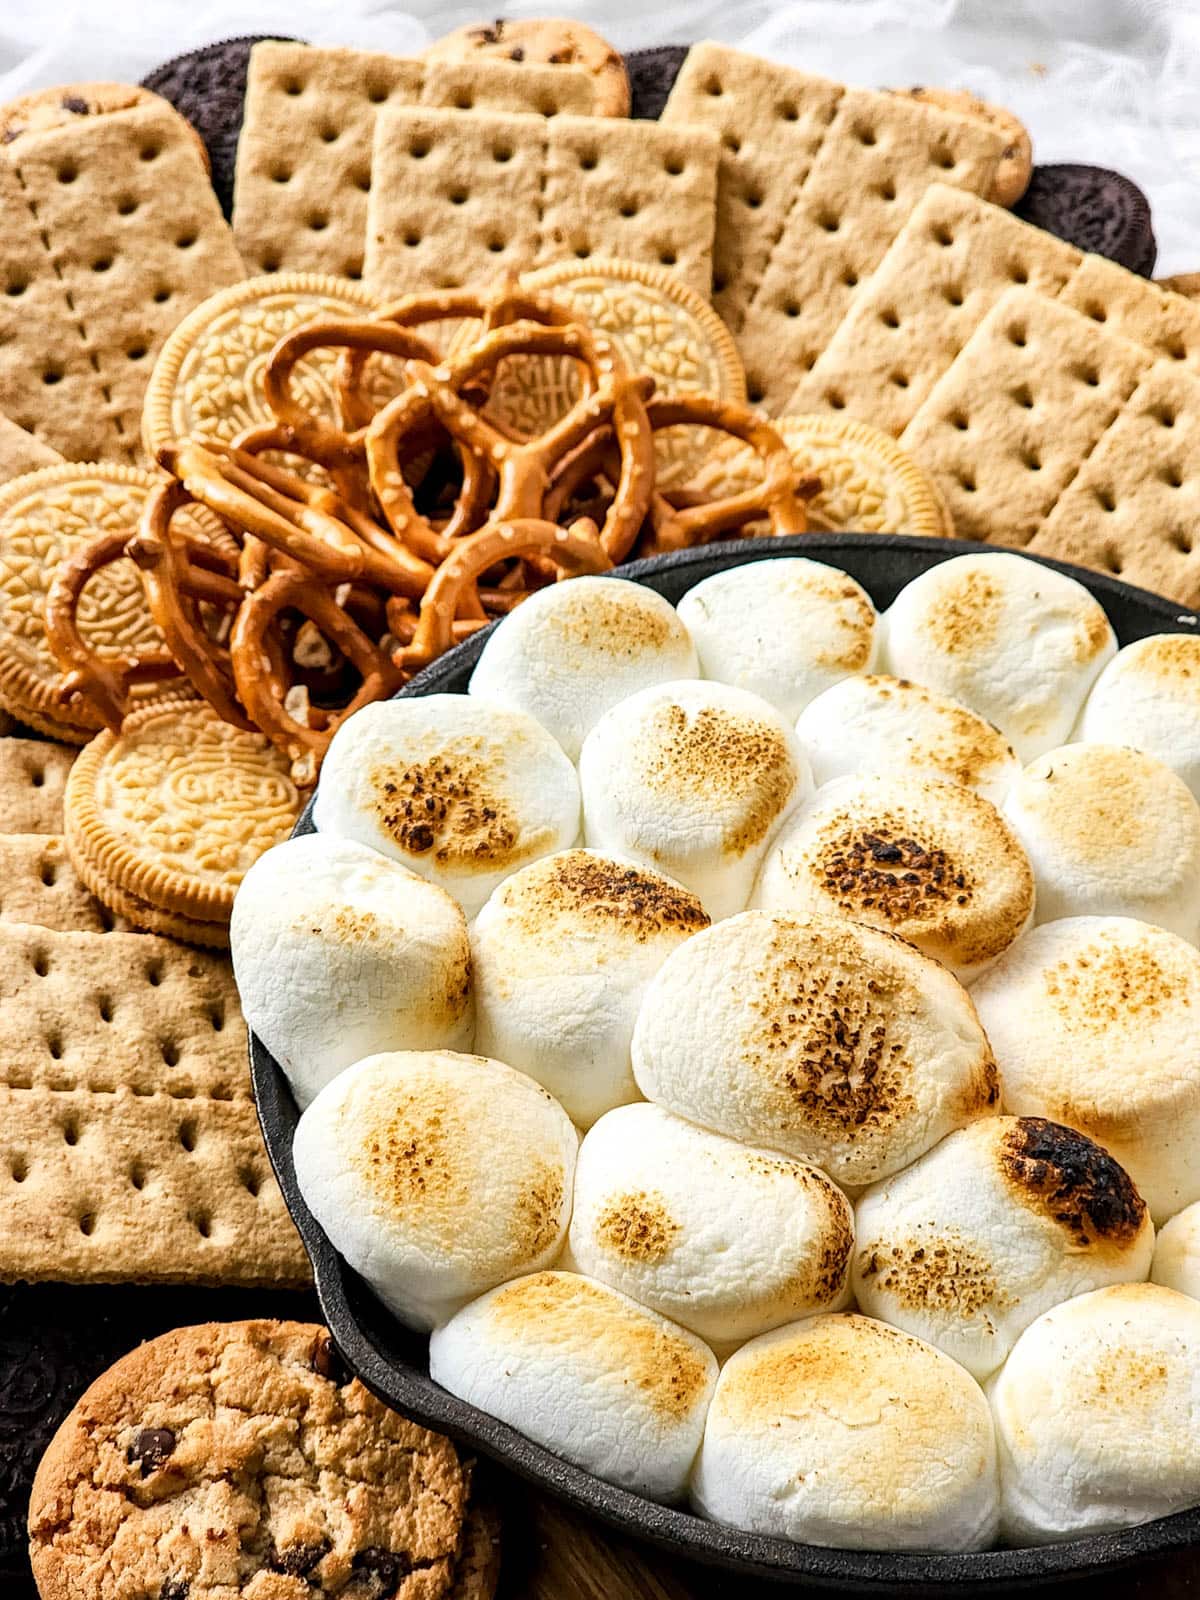 S'mores charcuterie board with roasted marshmallow dip